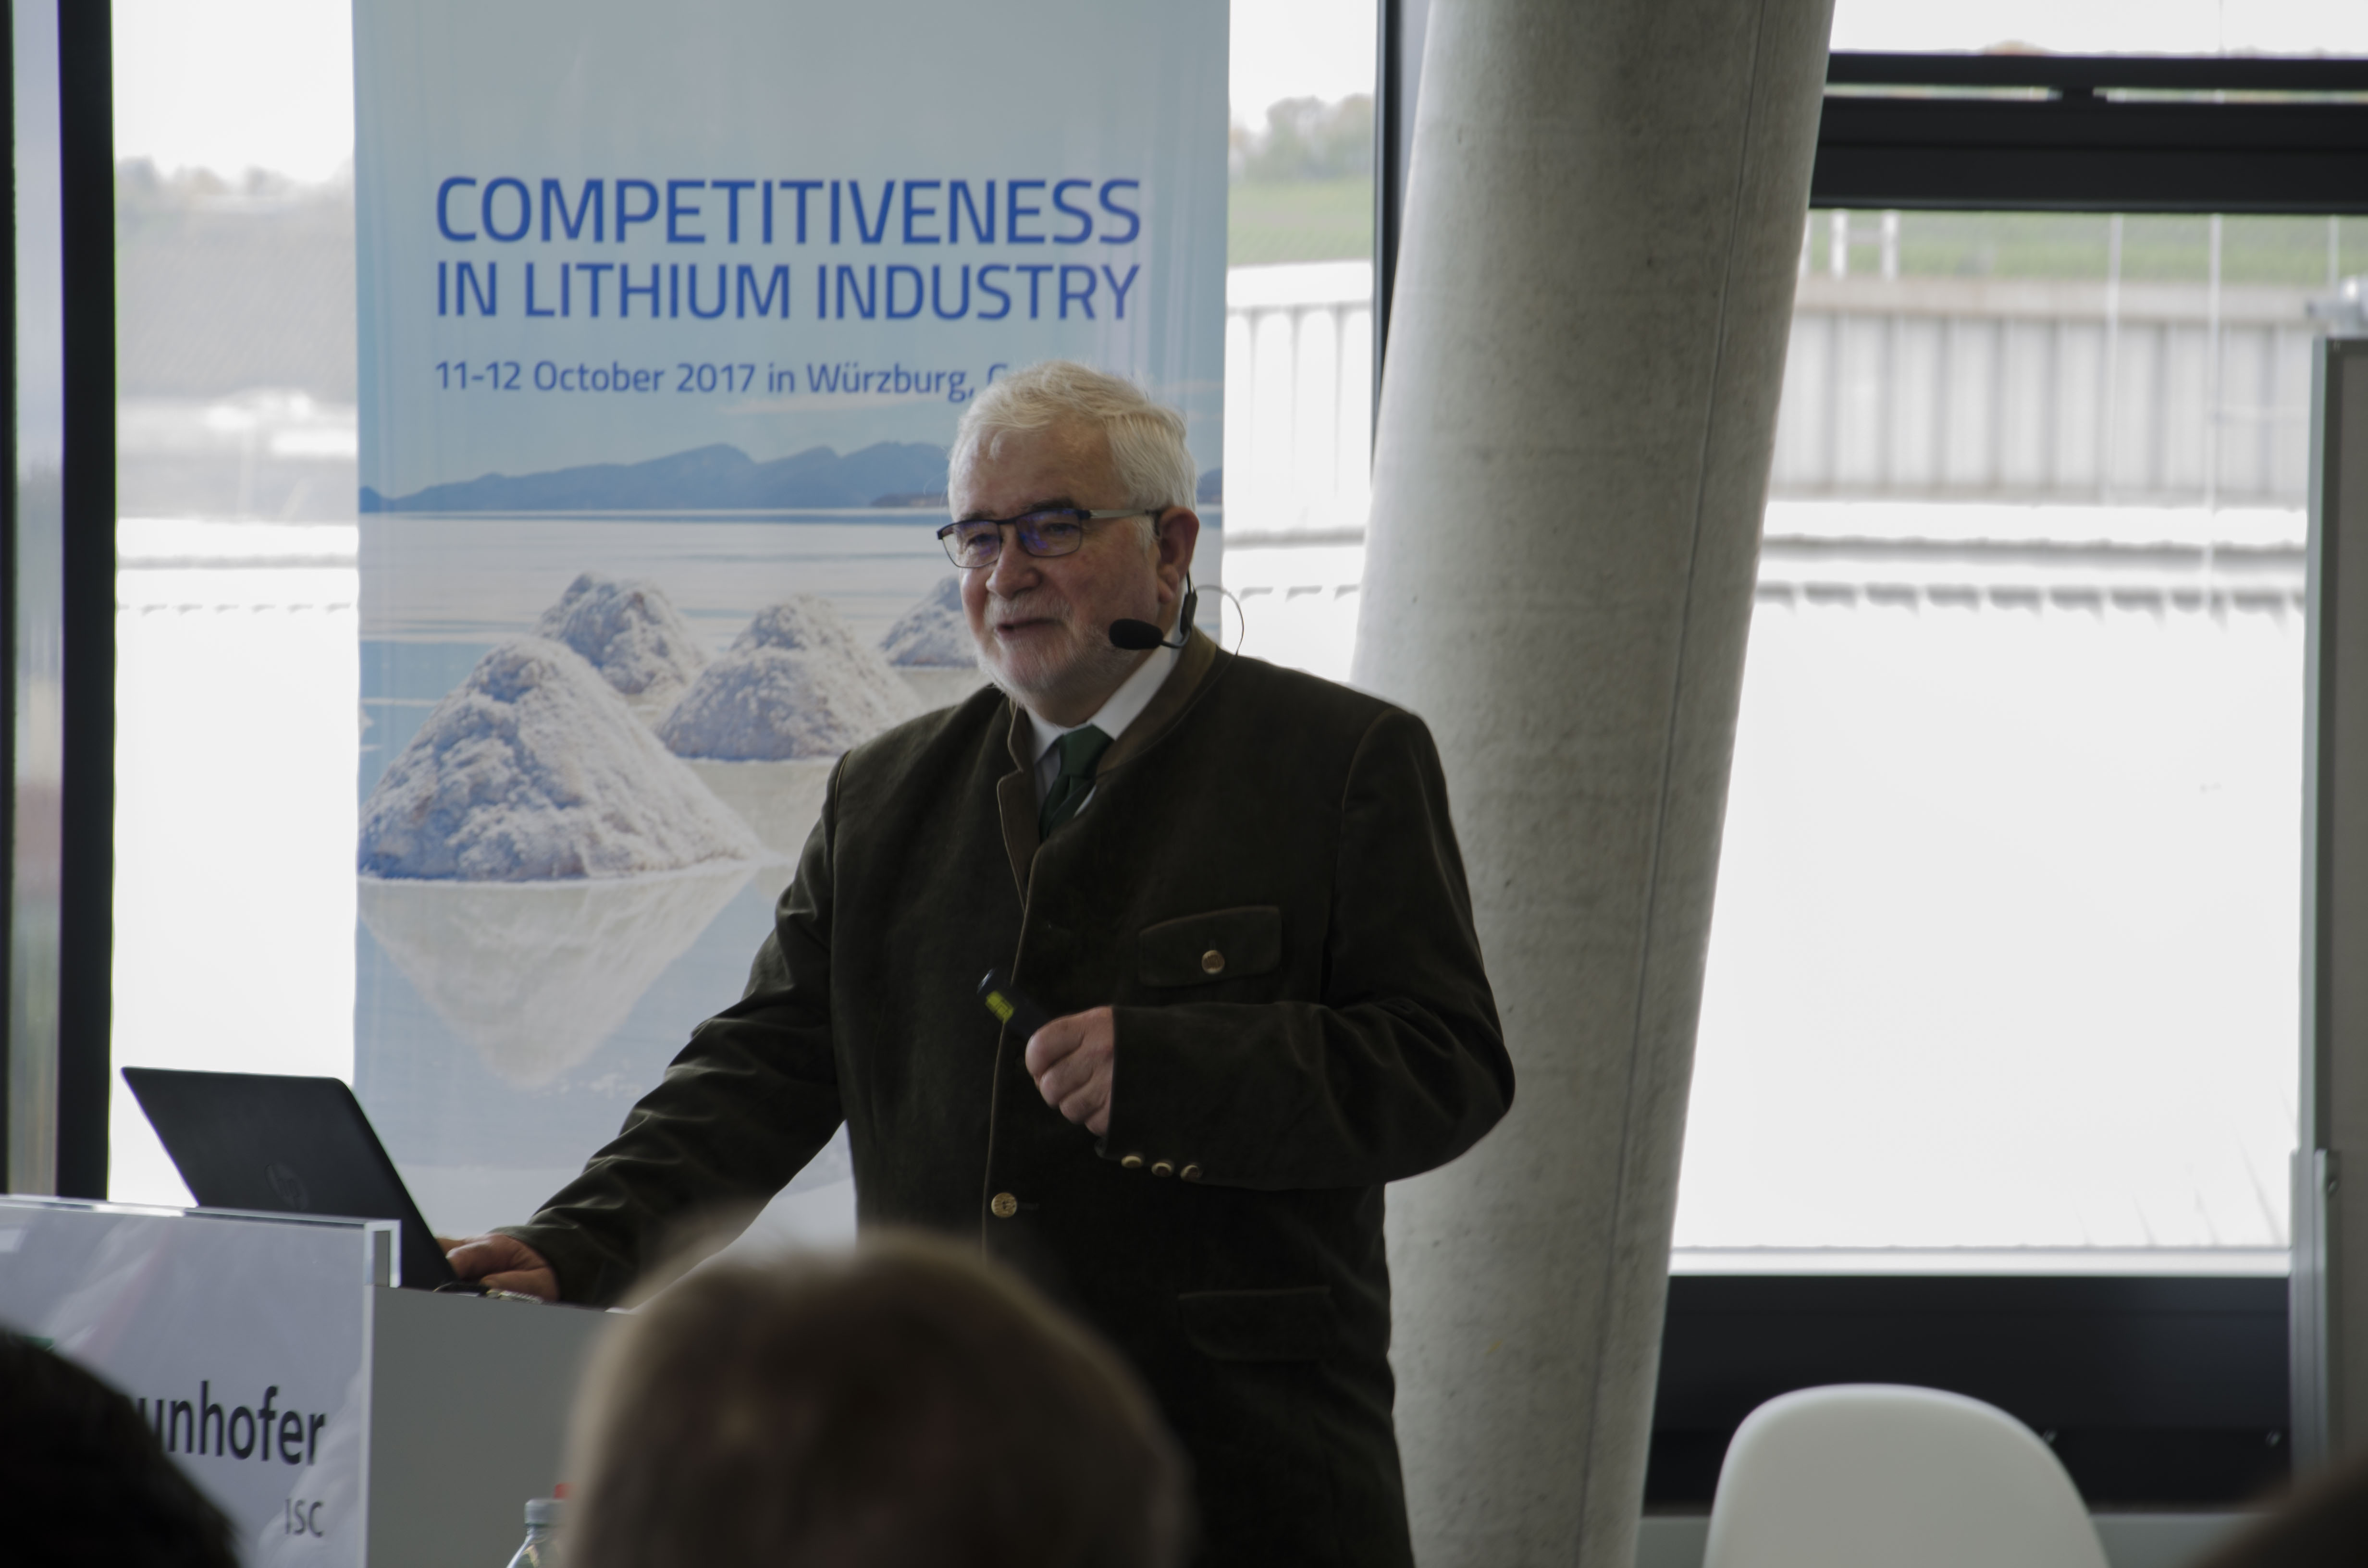 Patrice Christmann, Krysmine consultant and chair for the mining session within the EIT RawMaterials workshop, opened the Lithium mining session.